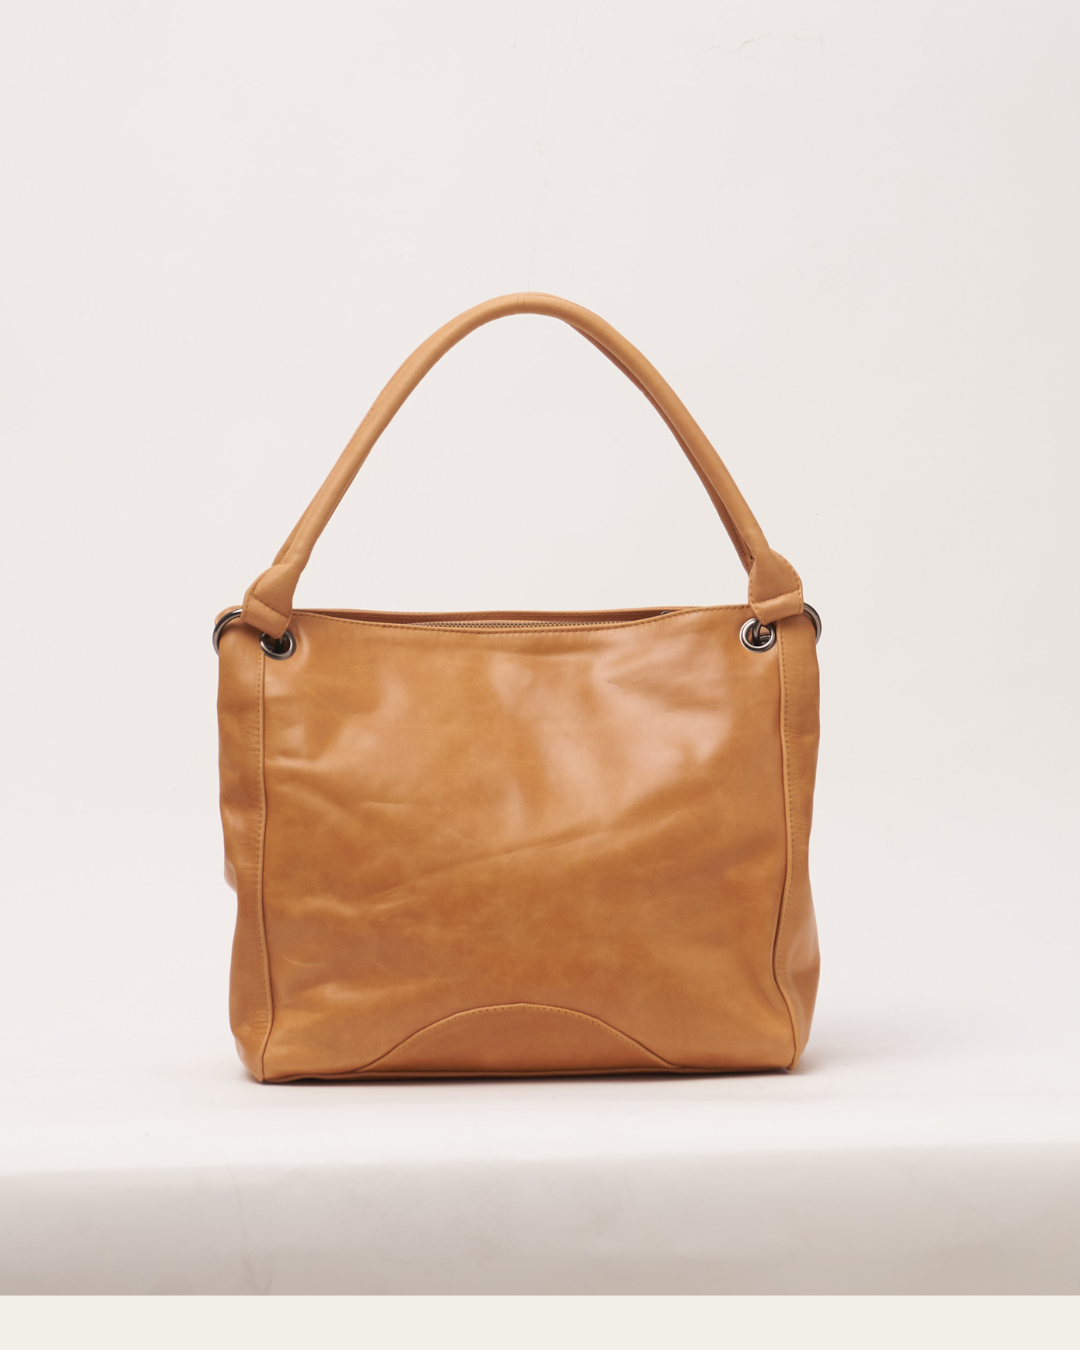 Remy Bag - BARE Leather